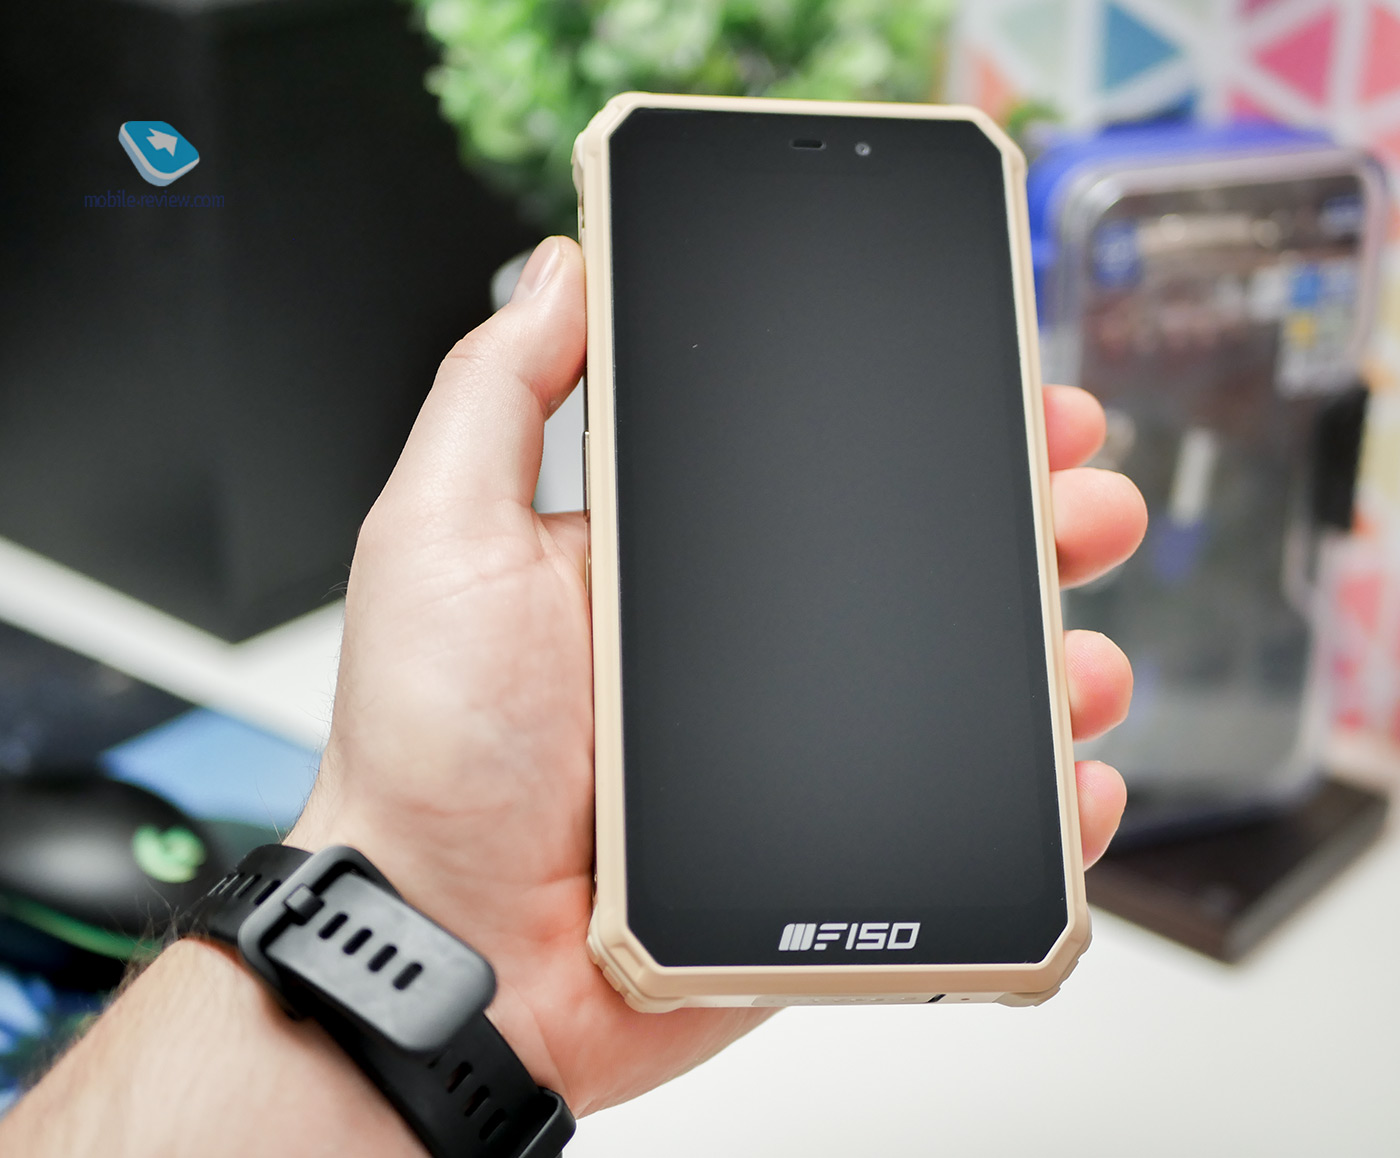 Review of the mysterious protected smartphone F150 B2021 - this "bison" is definitely too tough for you!